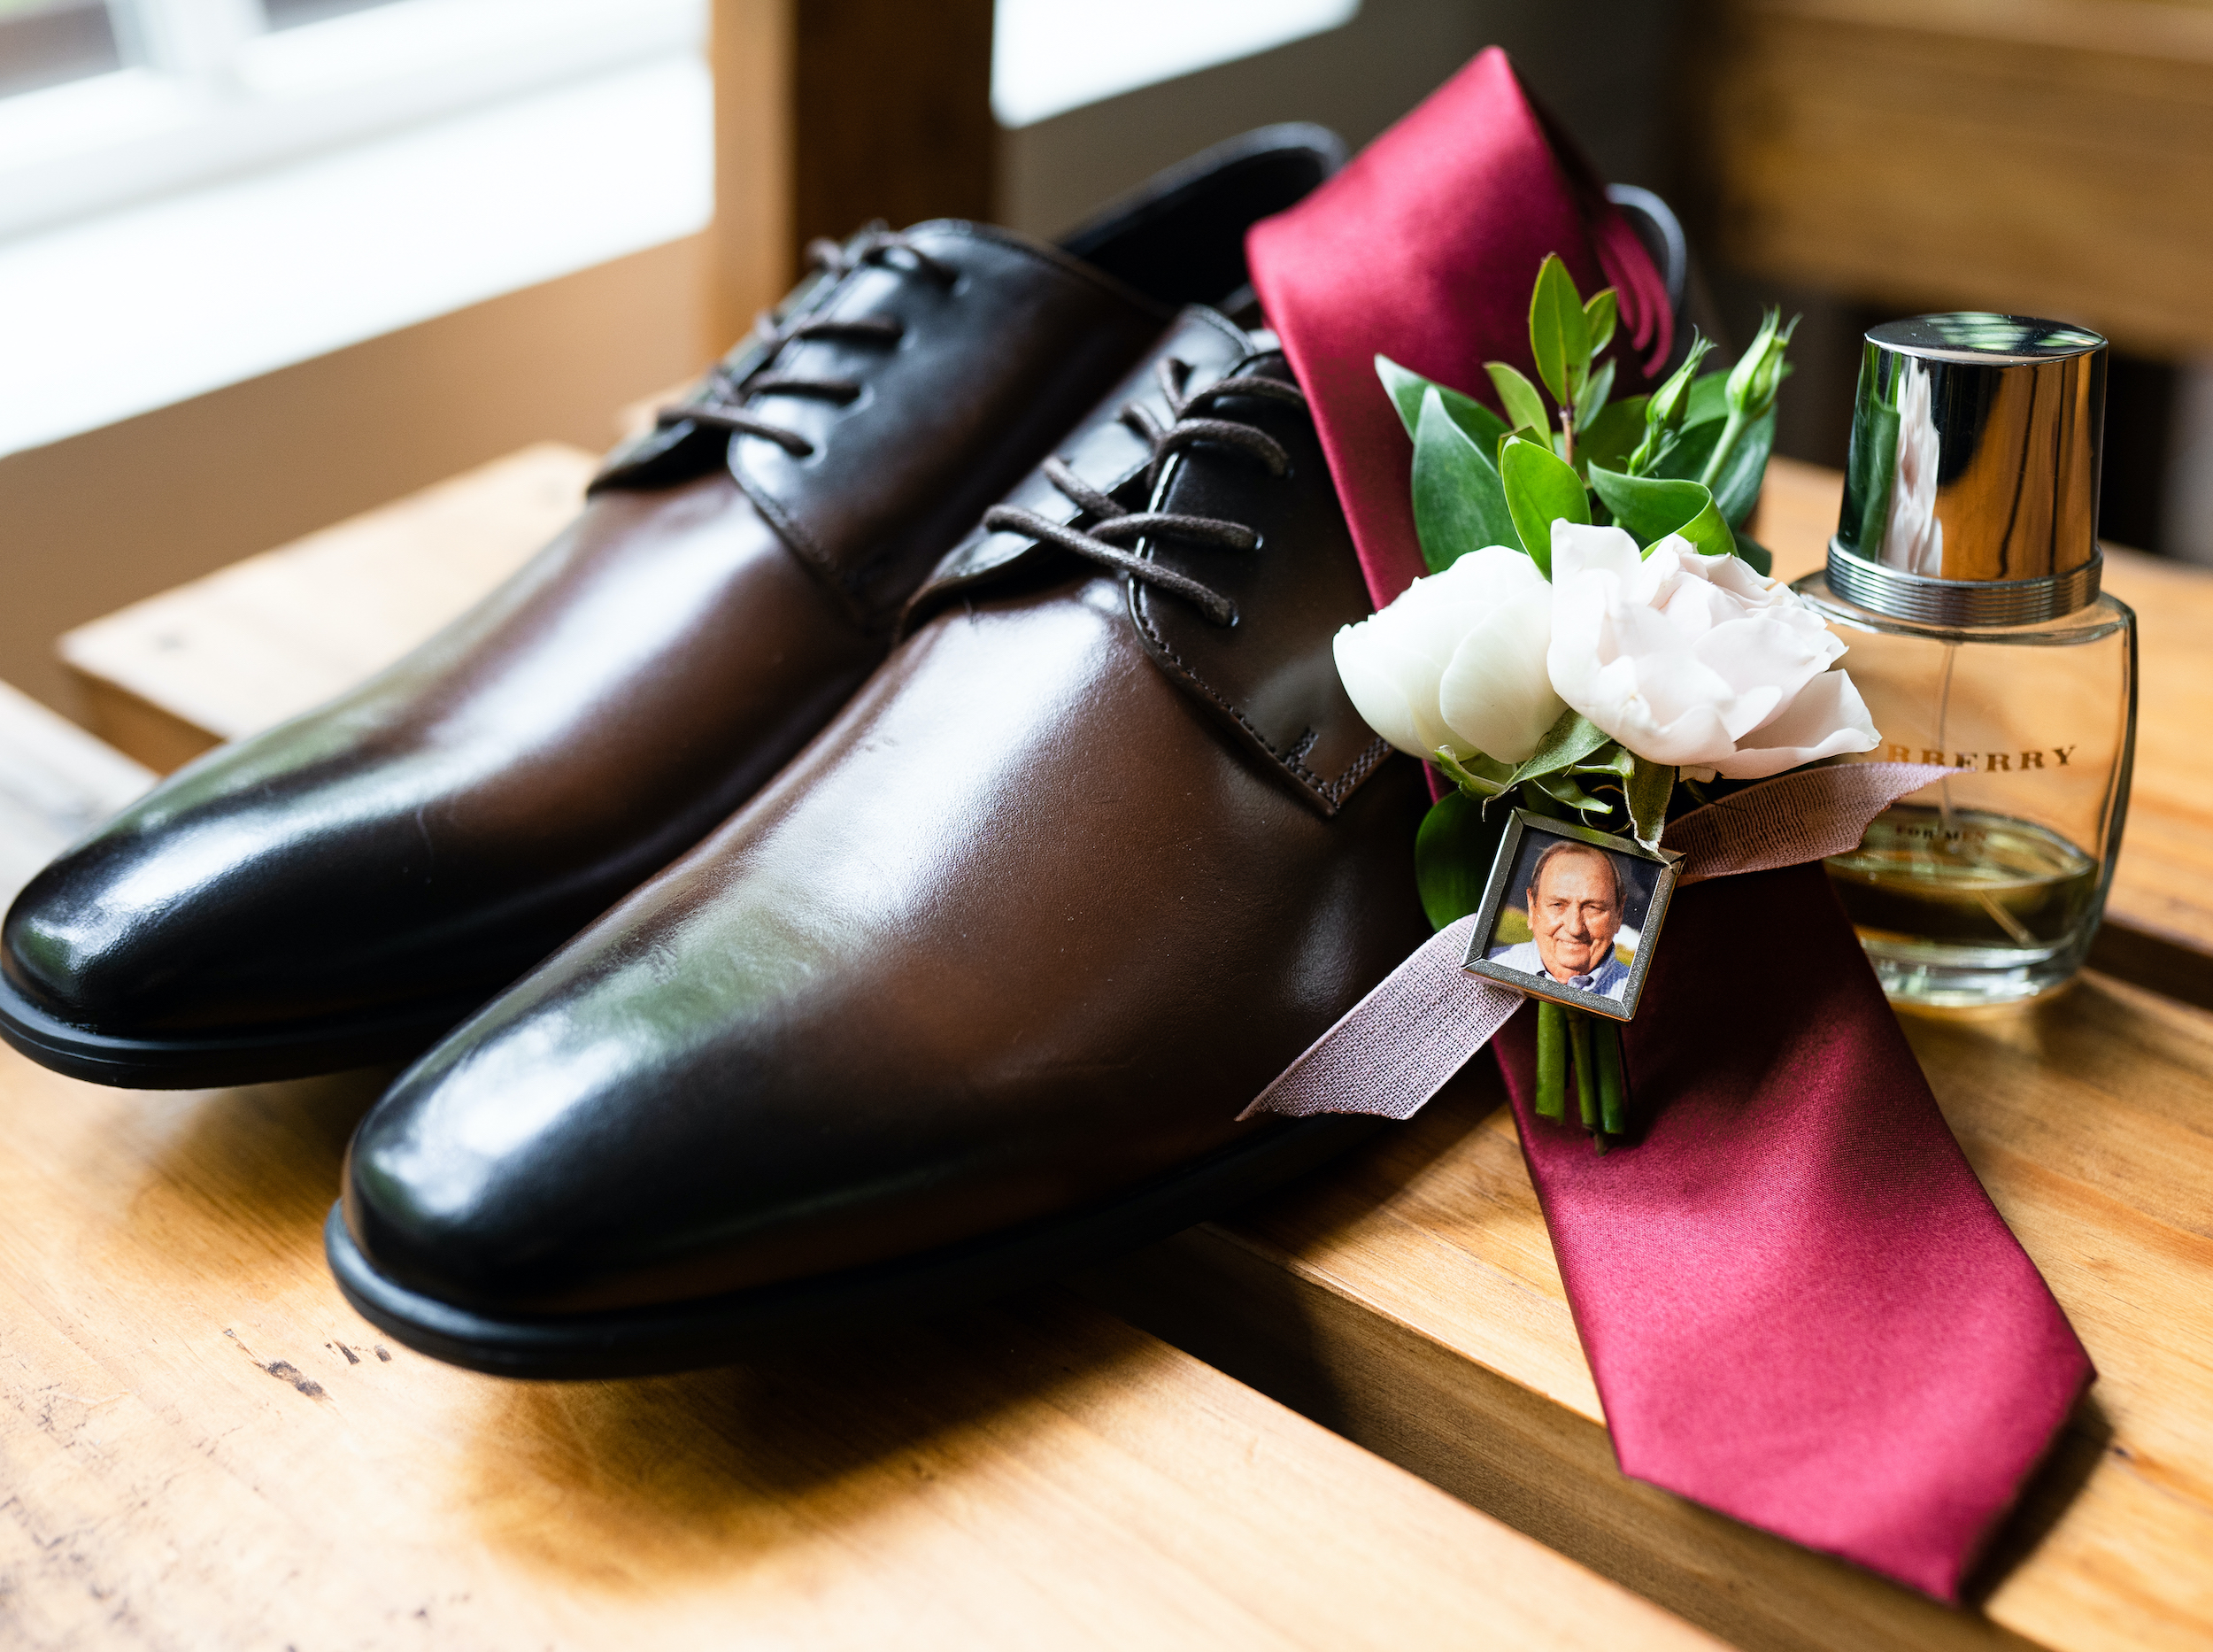 The groom's shoes and burgundy tie are placed next to his cologne and a photo of a family member.